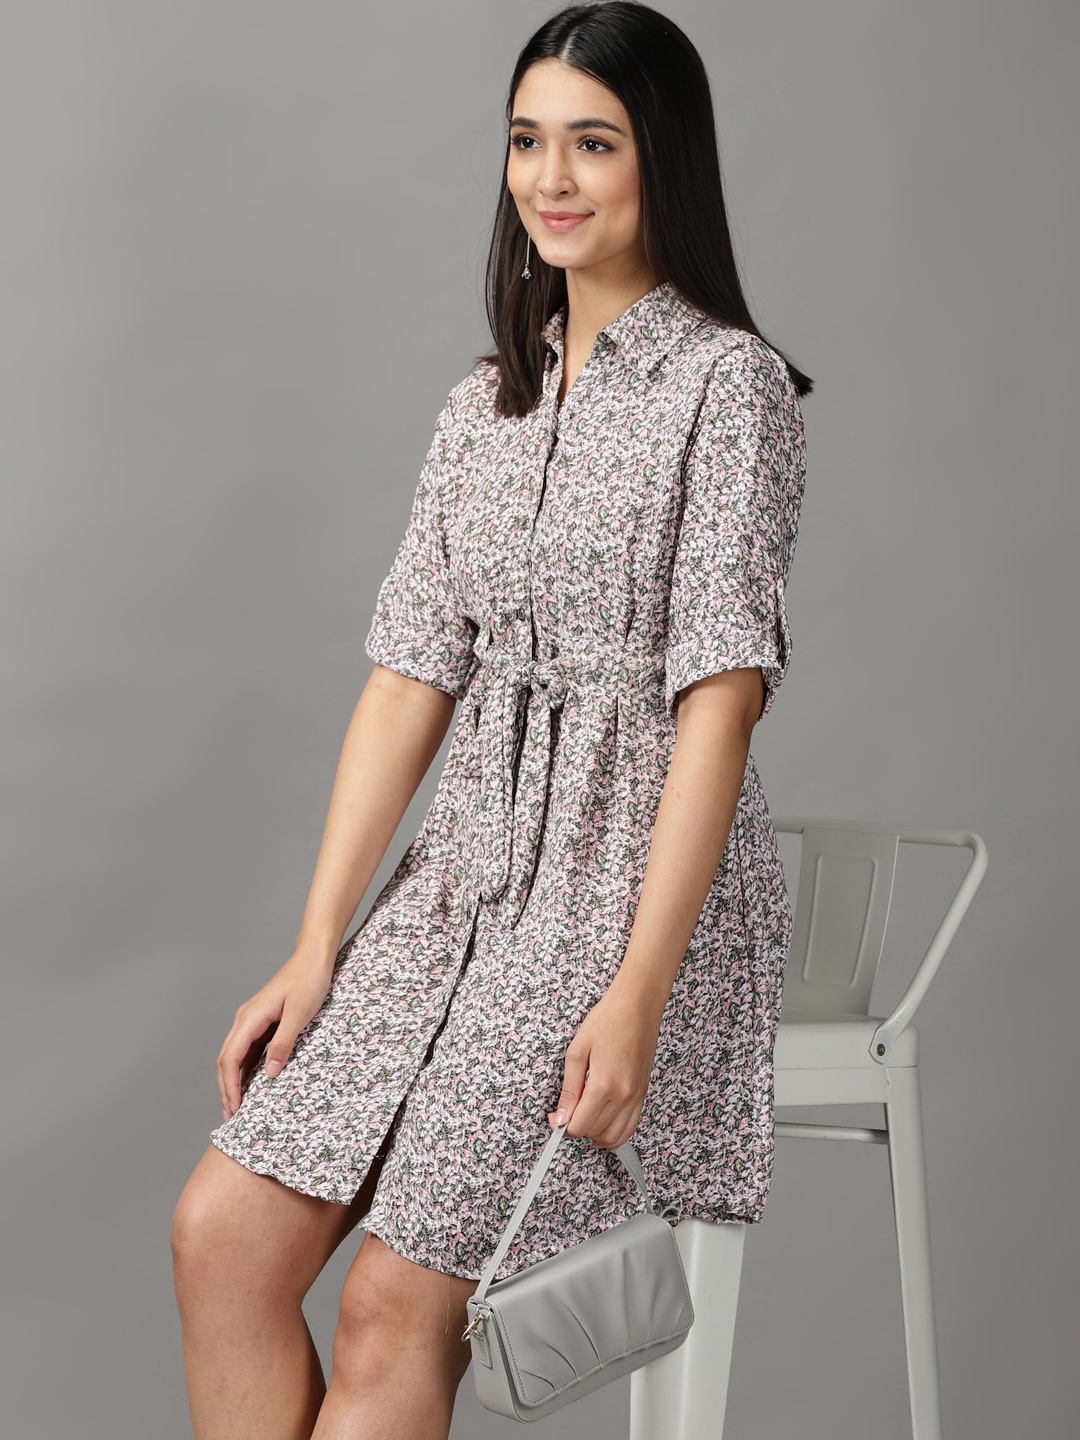 Women's Green Polyester Printed Dresses